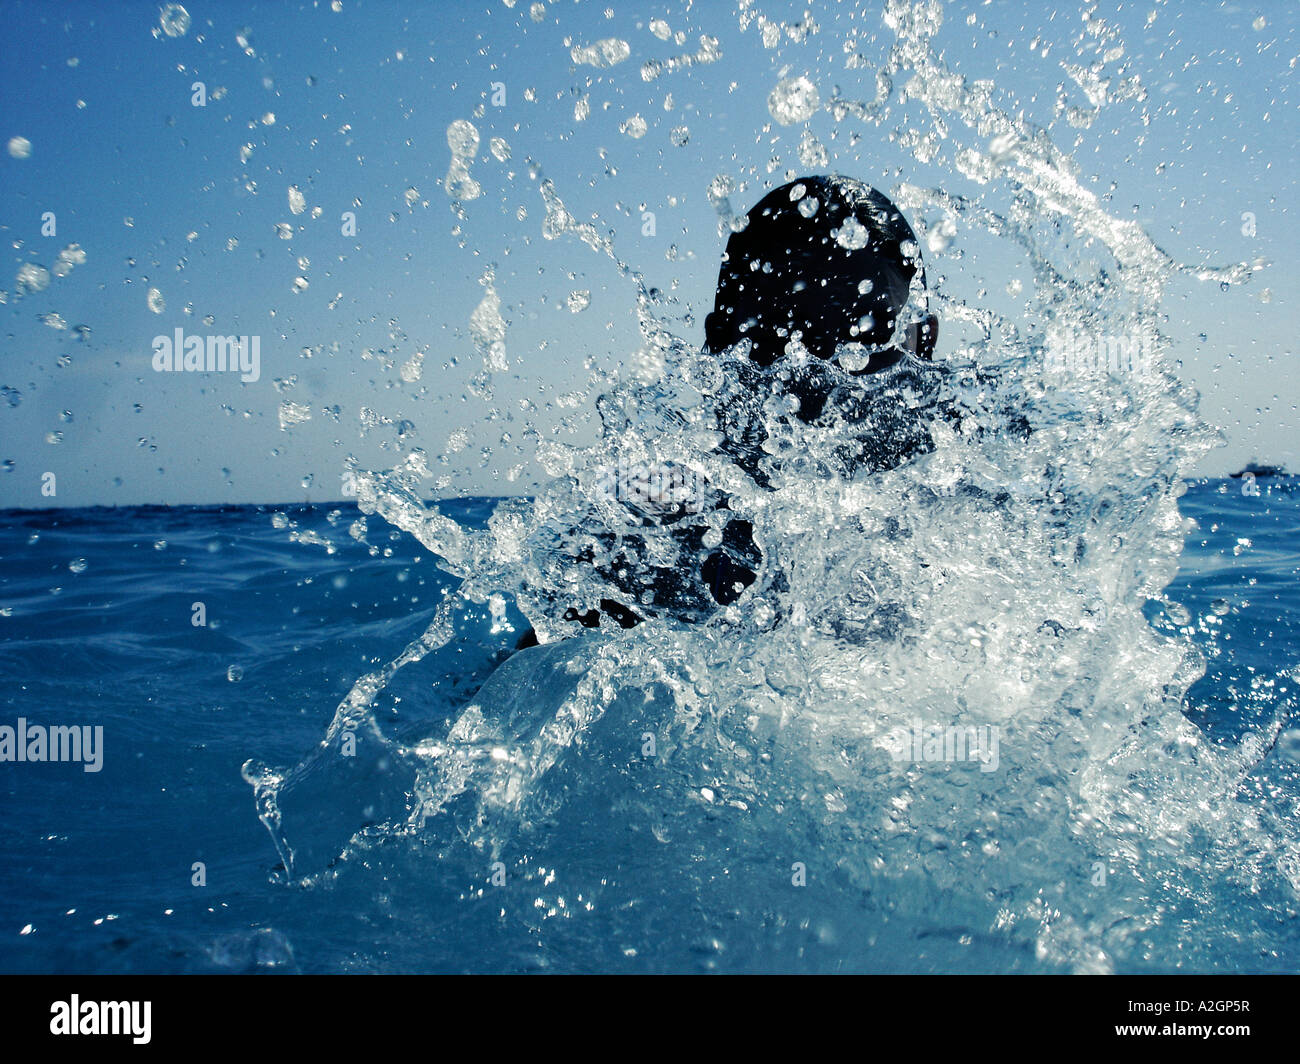 Man being splashed in the sea Stock Photo